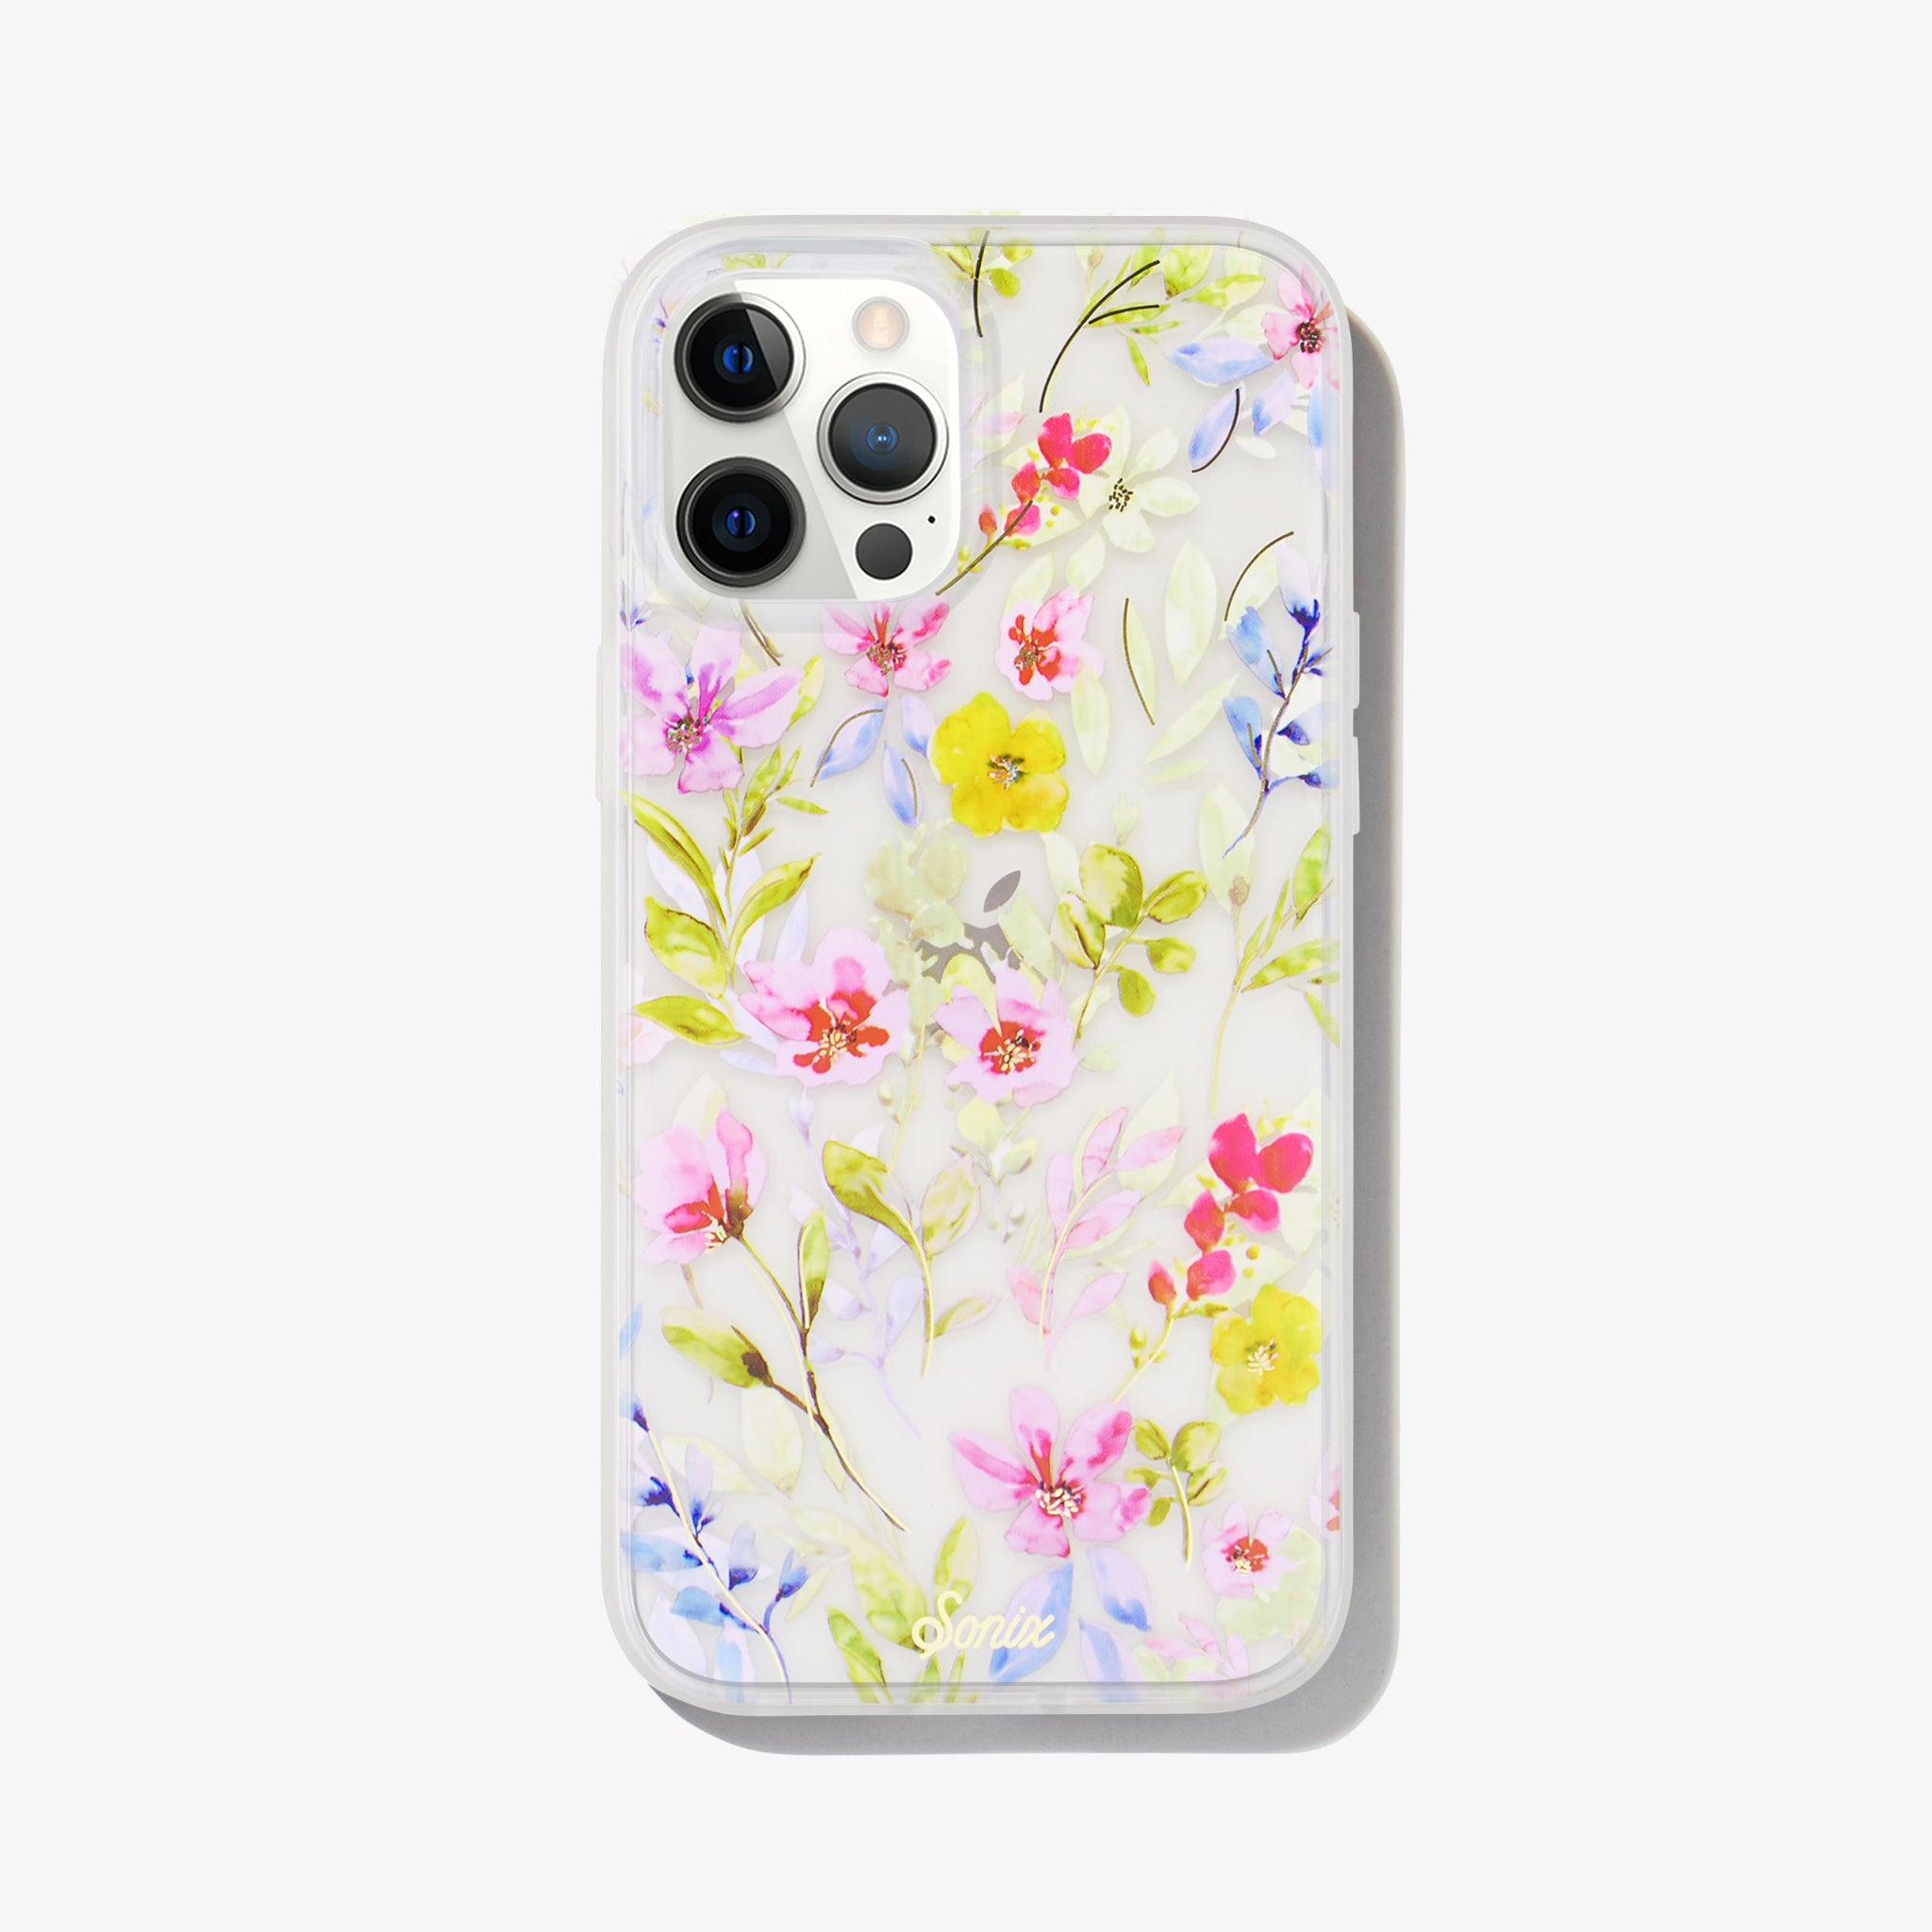 watercolor bouquets printed on a white iPhone 12 pro with hints of pink, purple, and blue accented with bright greenery. featuring Sonix gold logo at bottom. 